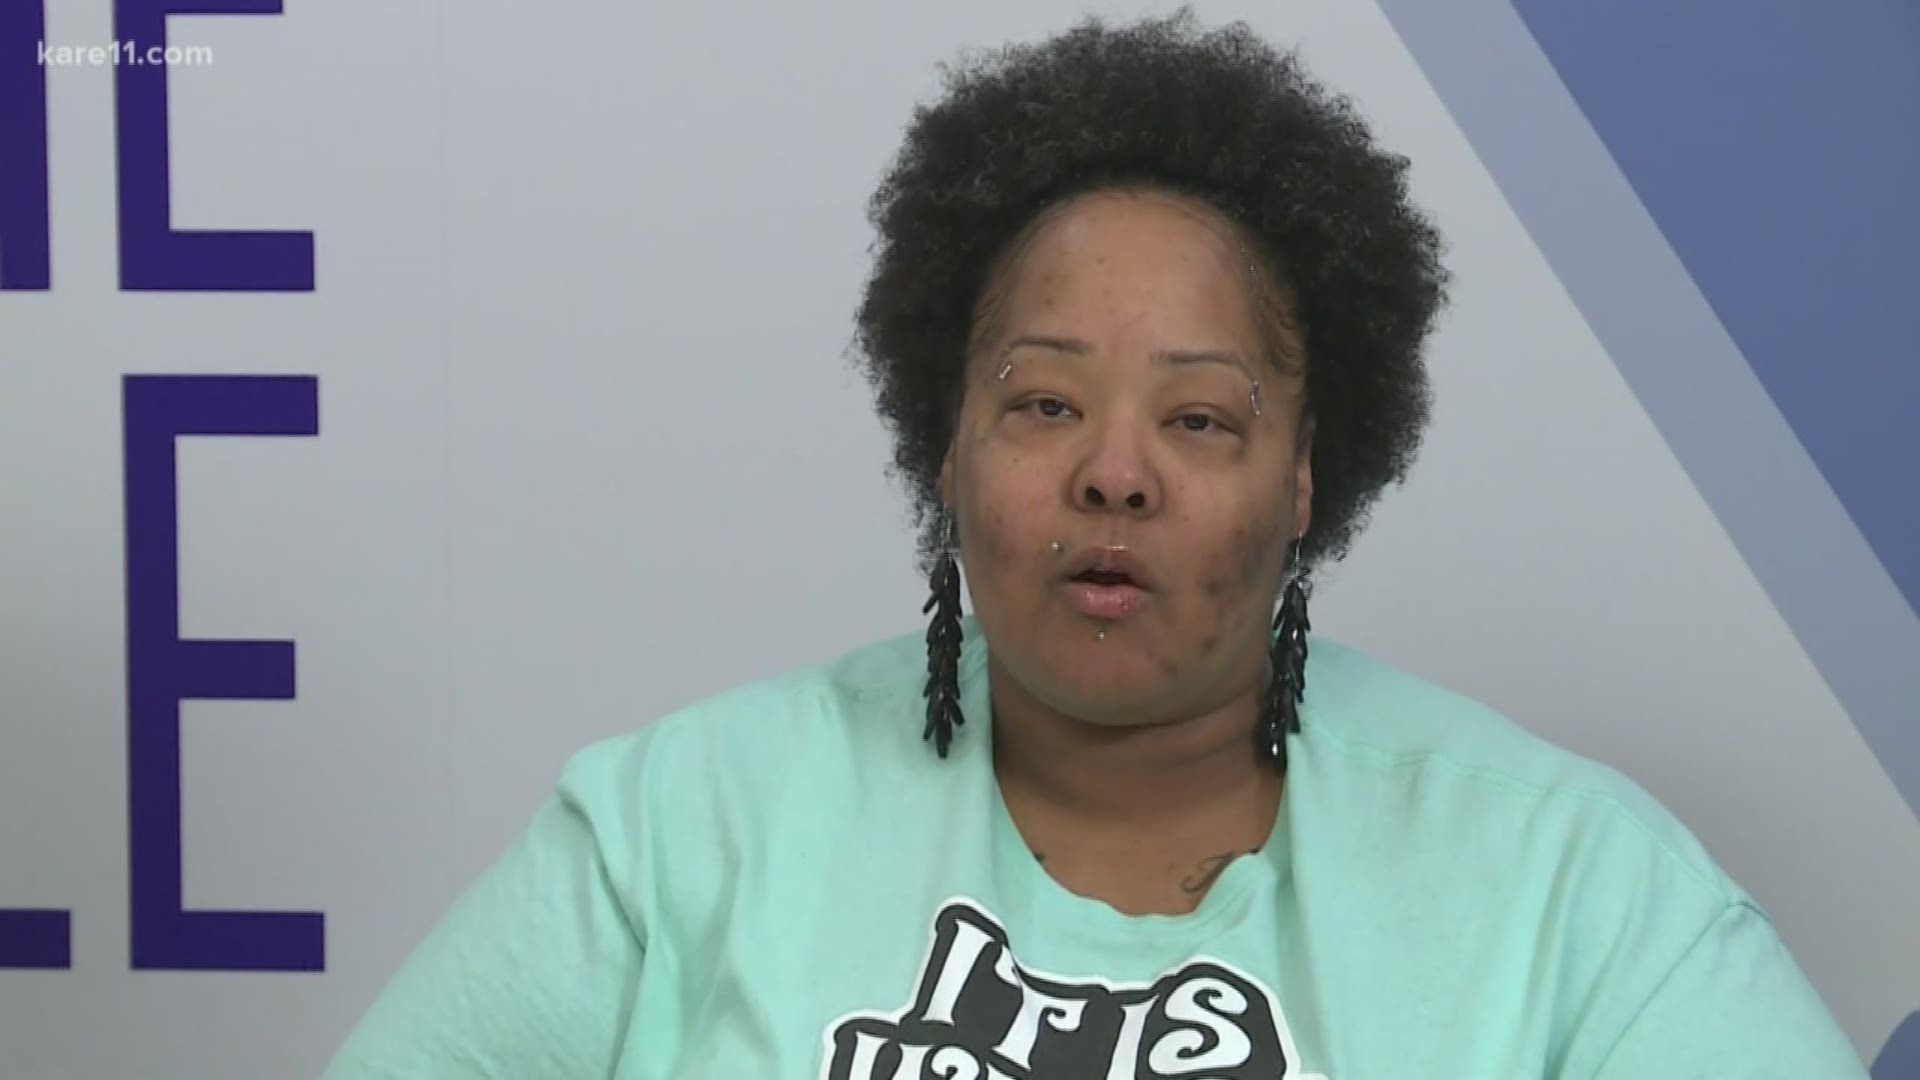 We're hearing from the mother of a 13-year-old arrested by St. Paul Police. The whole thing was recorded and that video has sparked questions in the community.